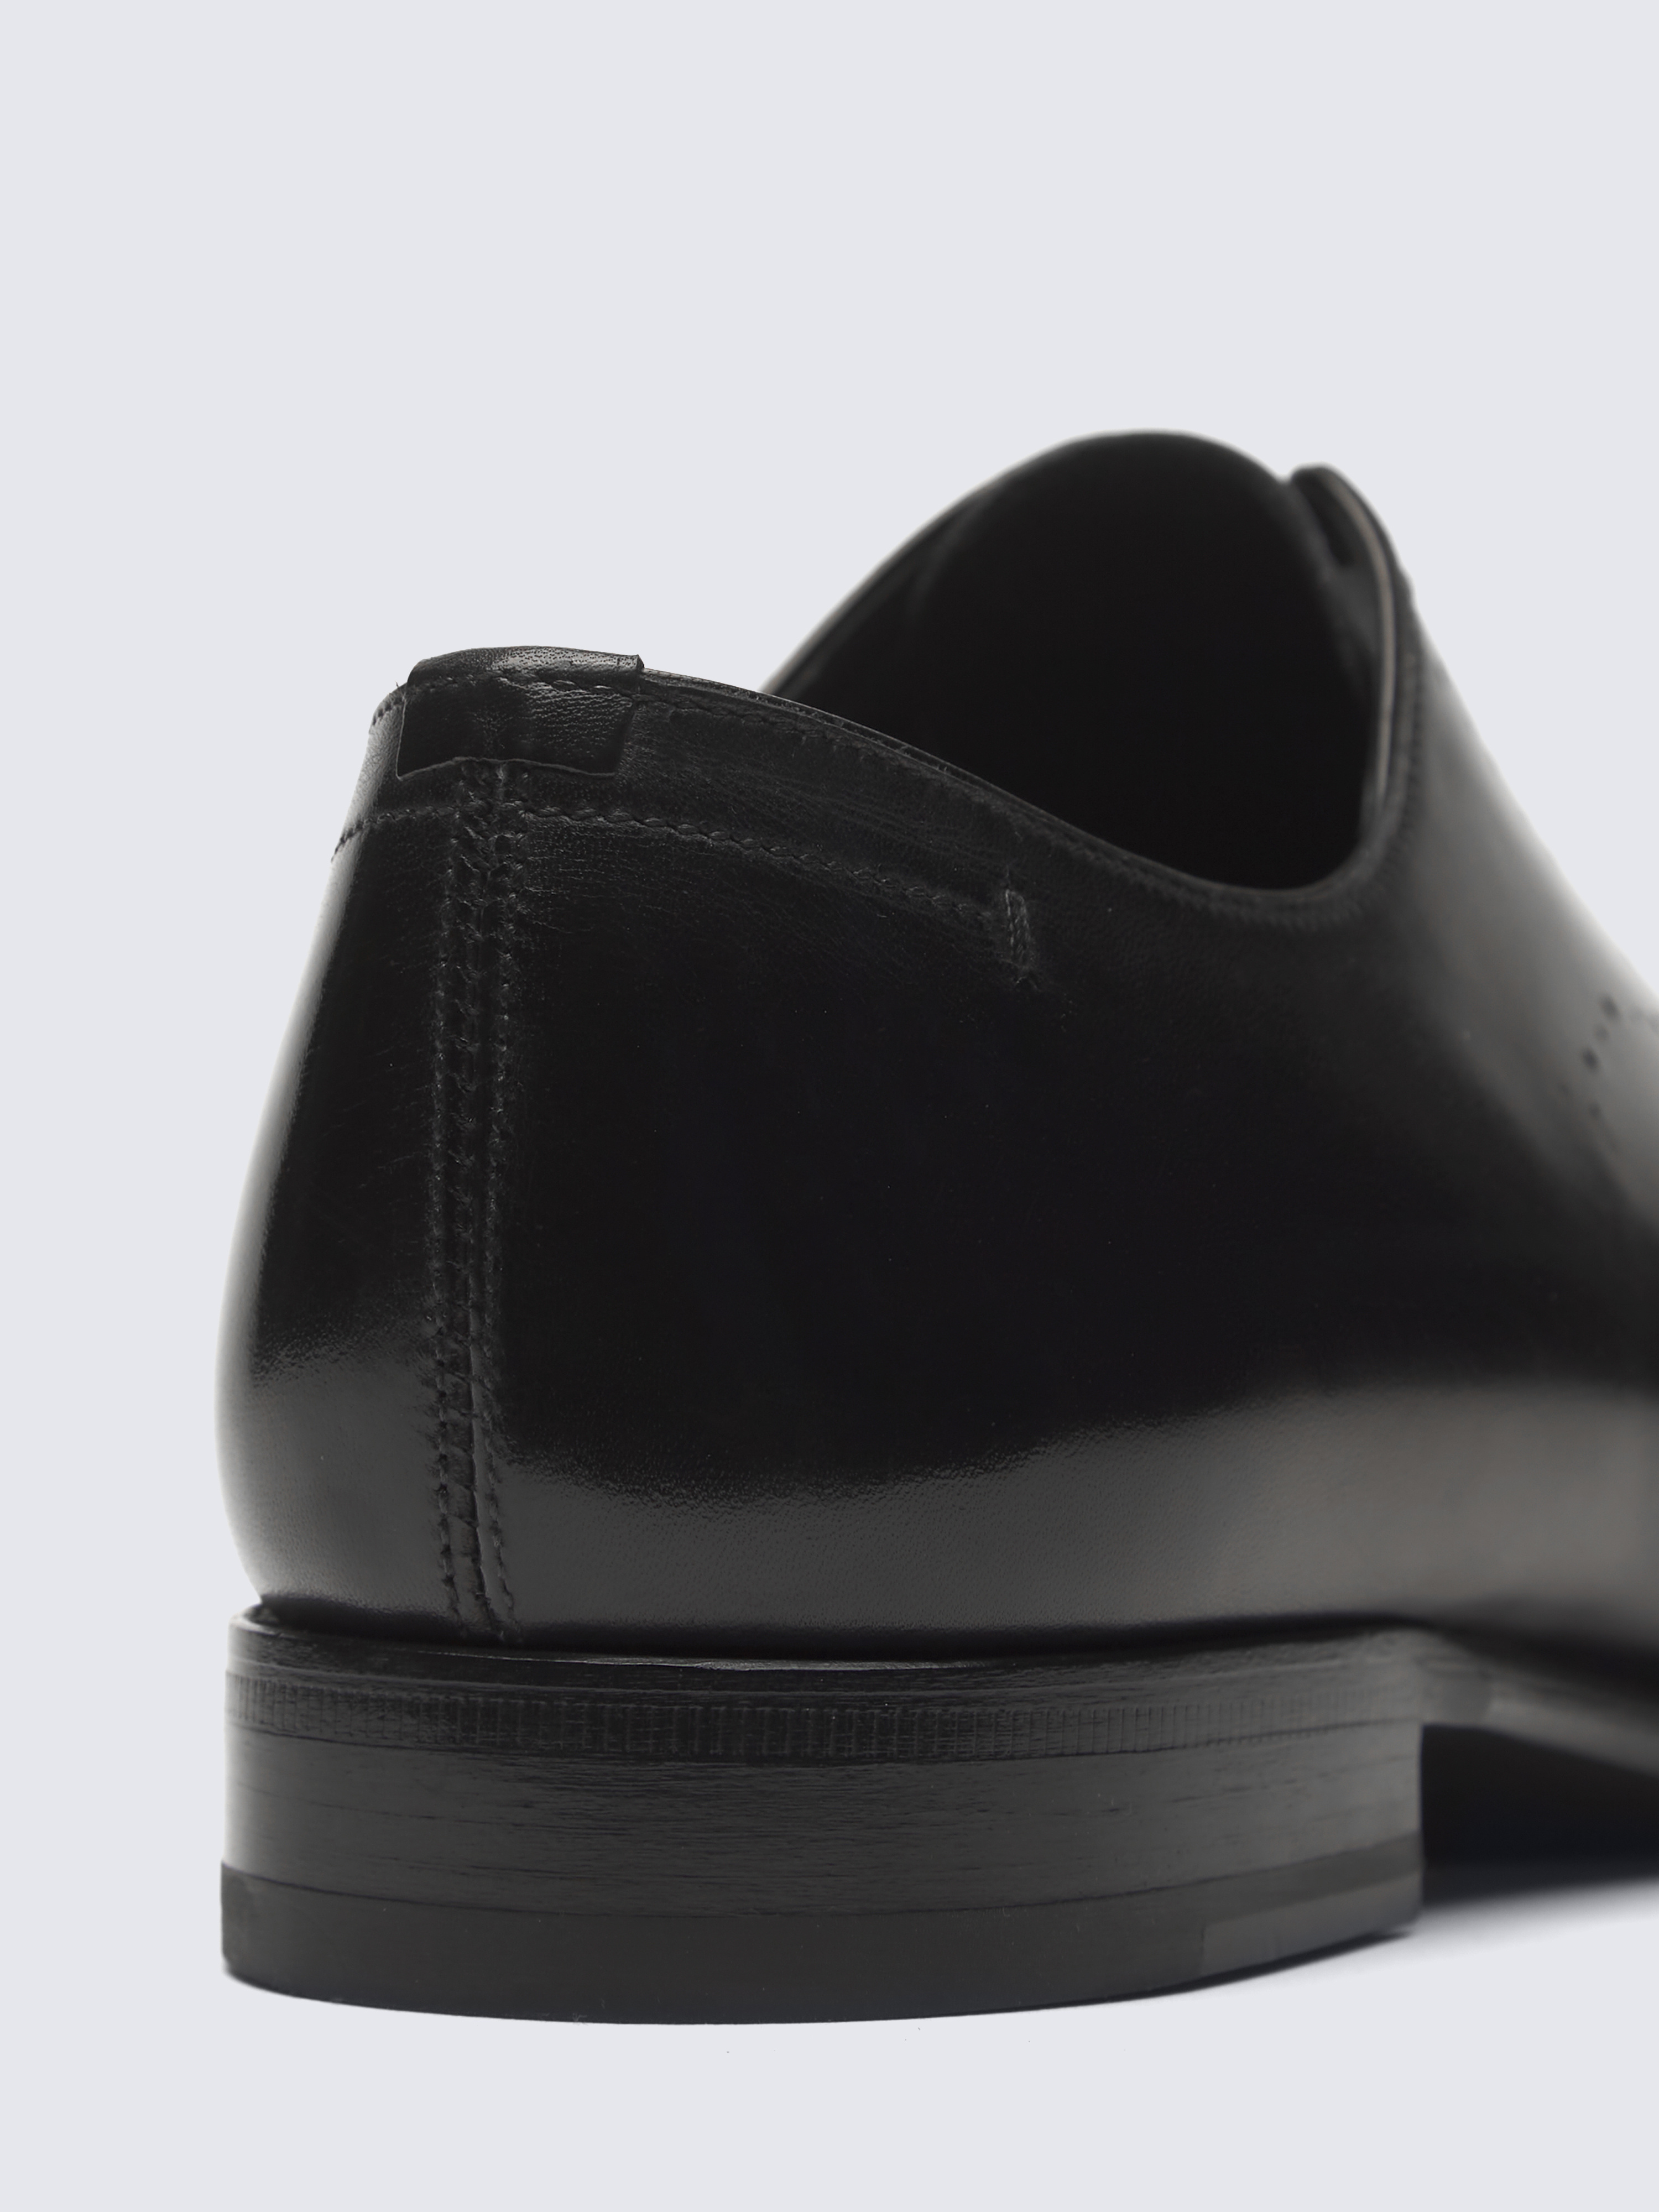 Black calf leather oxford shoes | Brioni® US Official Store